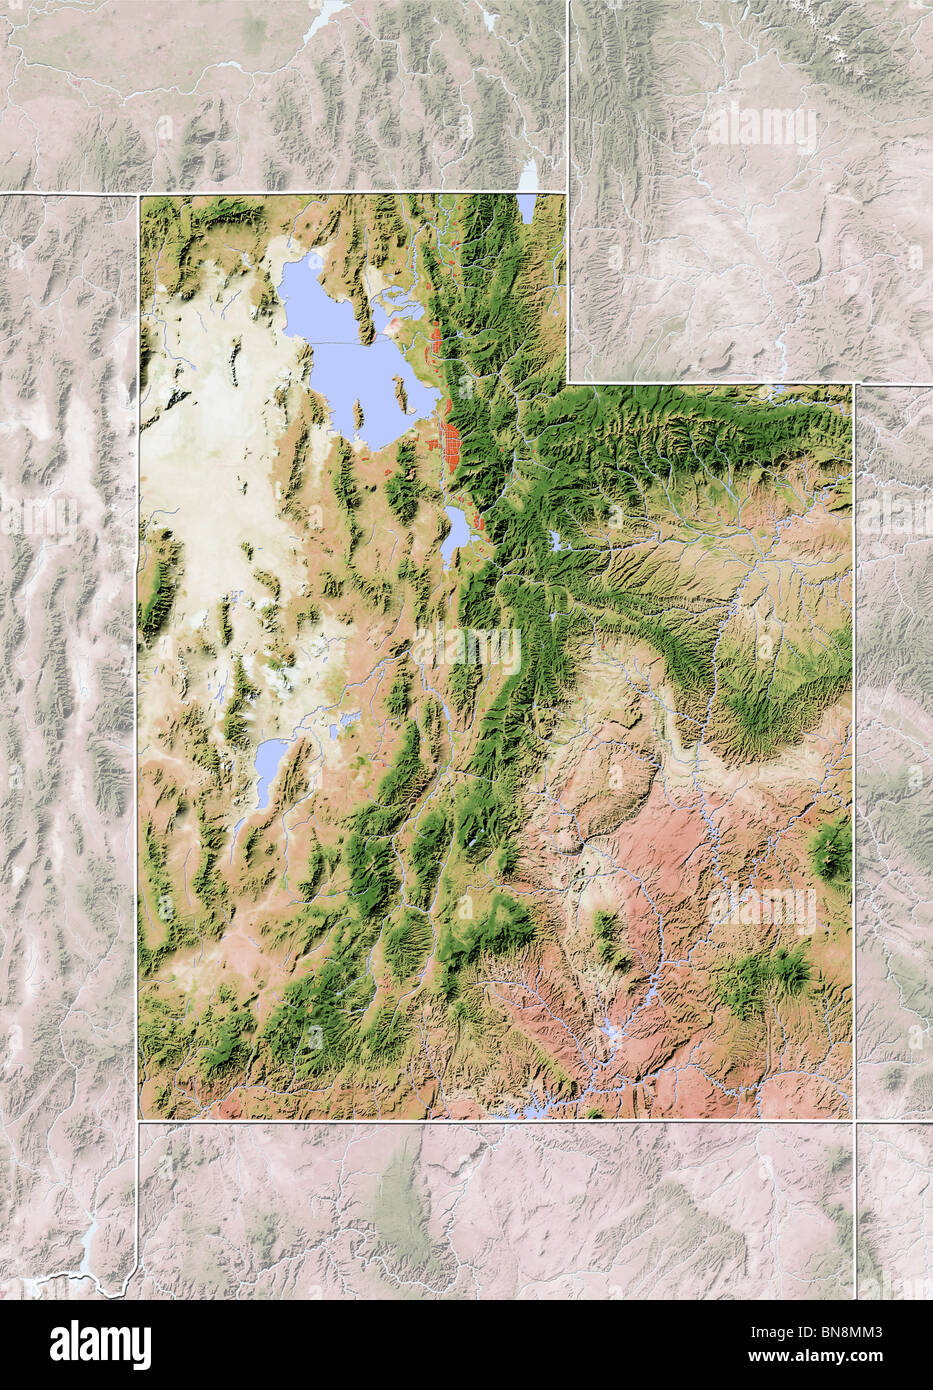 Utah, shaded relief map. Stock Photo